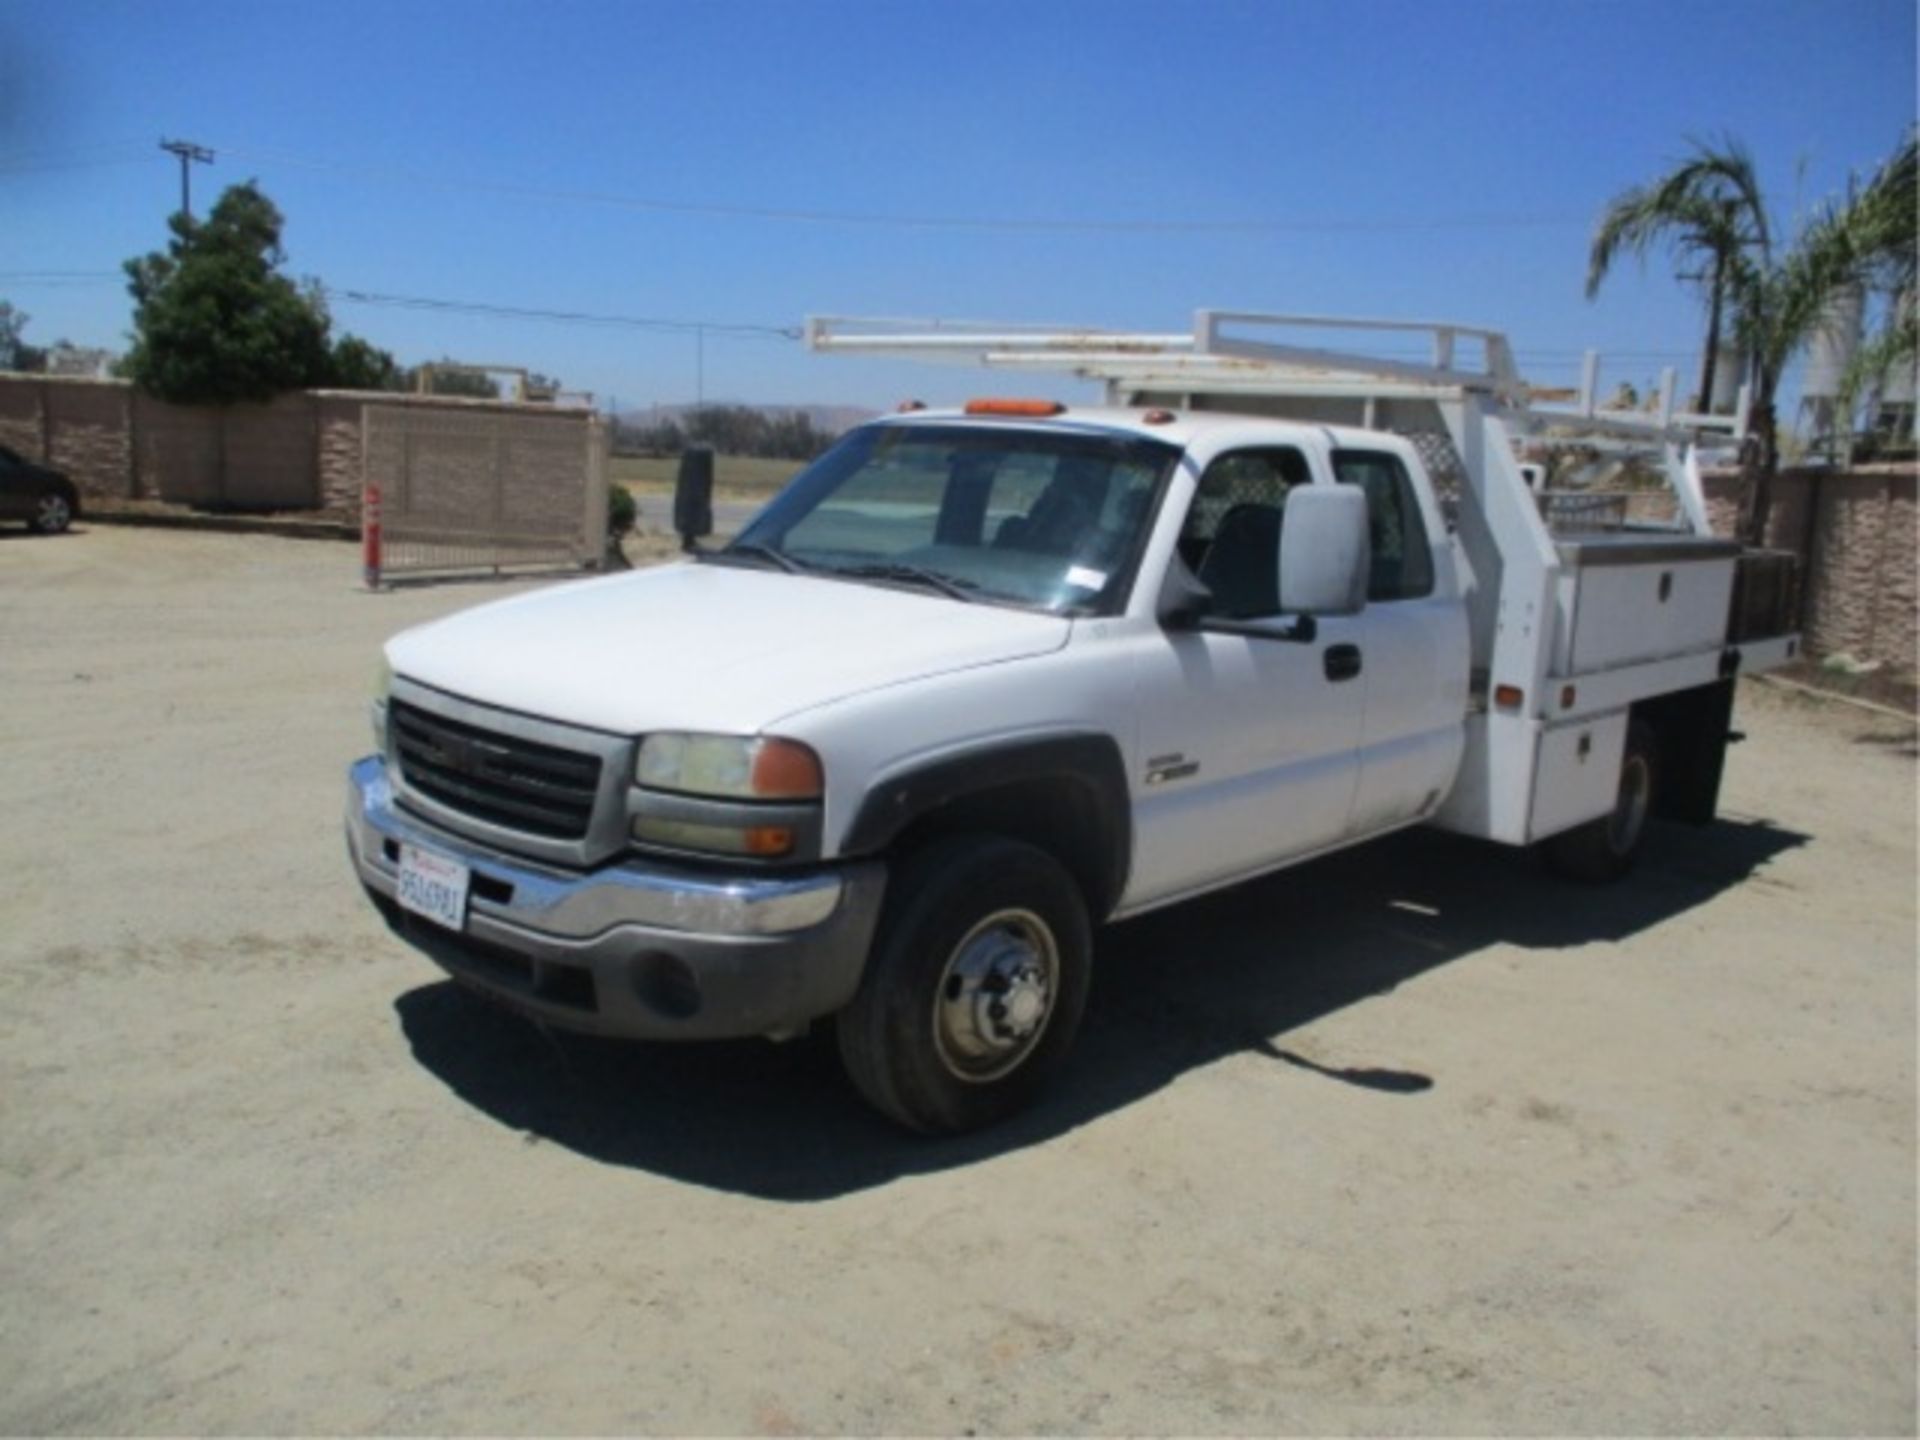 2006 Chevrolet 3500 Extended-Cab Utility Truck, 6.6L Turbo Diesel, Automatic, Tool Boxes, Lumber - Image 4 of 71